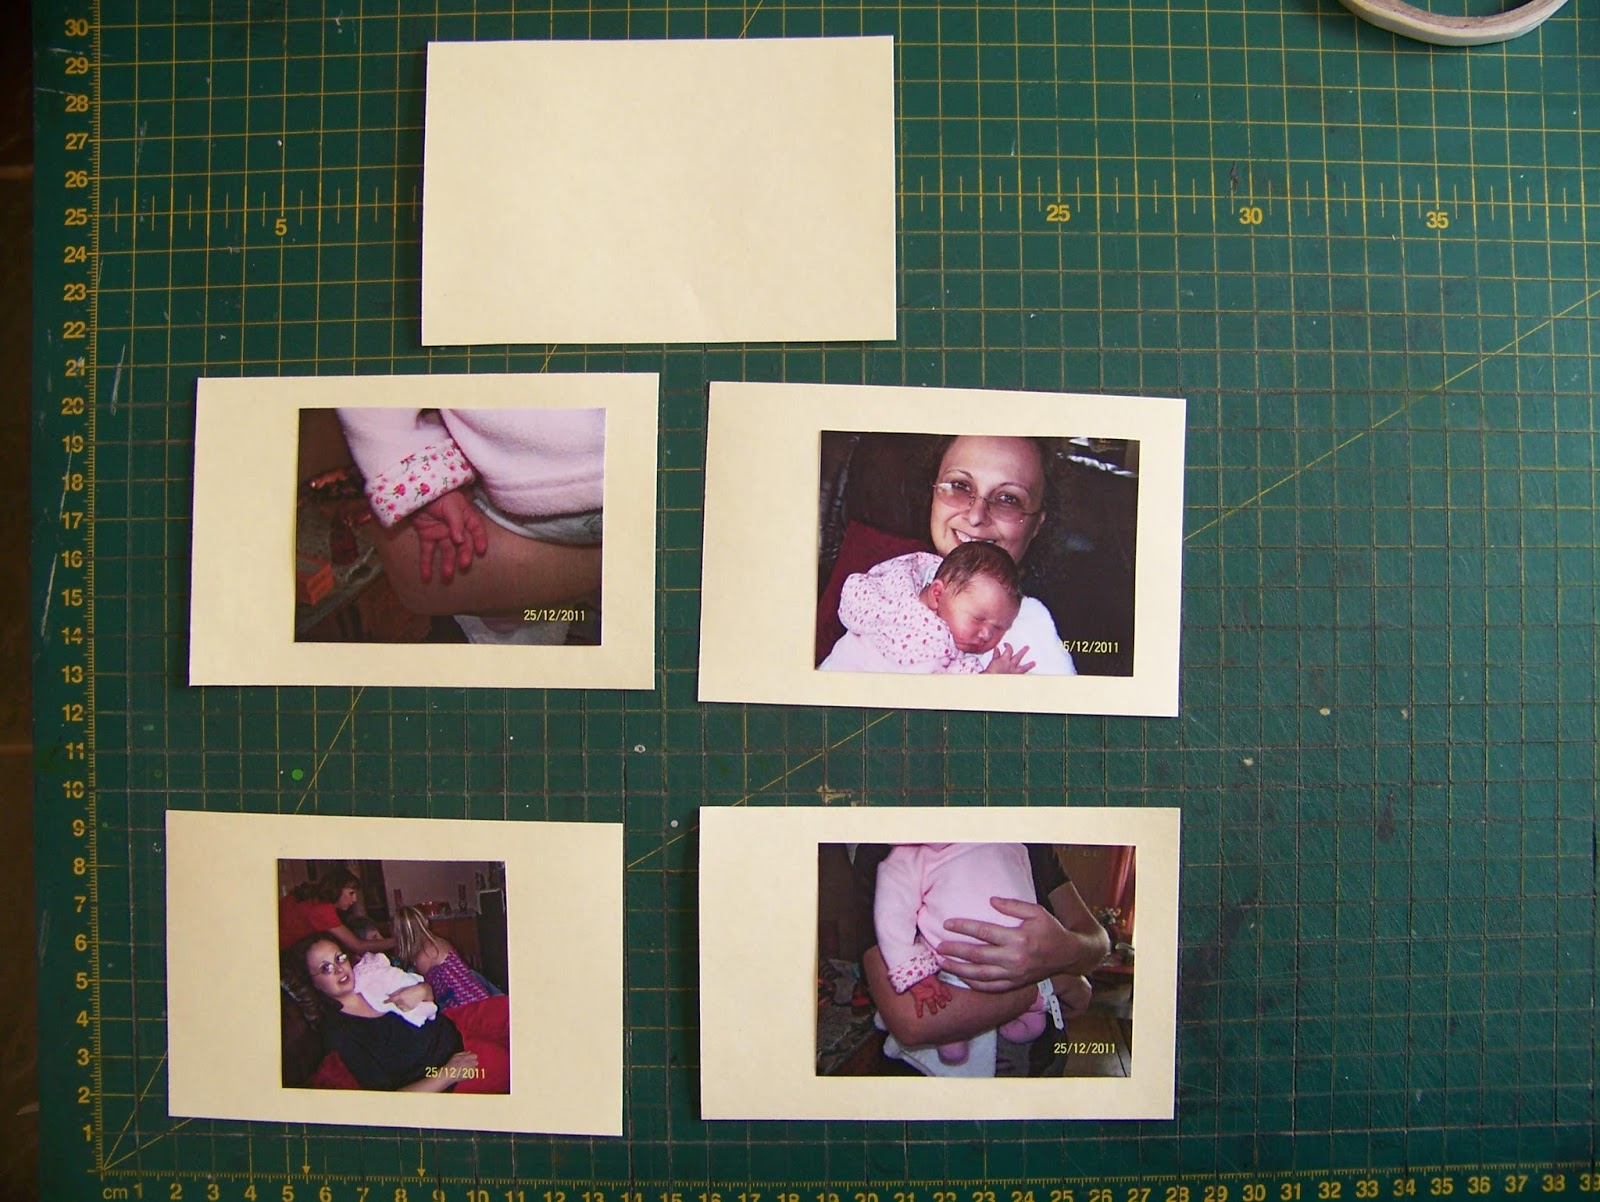 A Pretty Talent Blog: Scrapbooking: Adding a mini album to a page layout